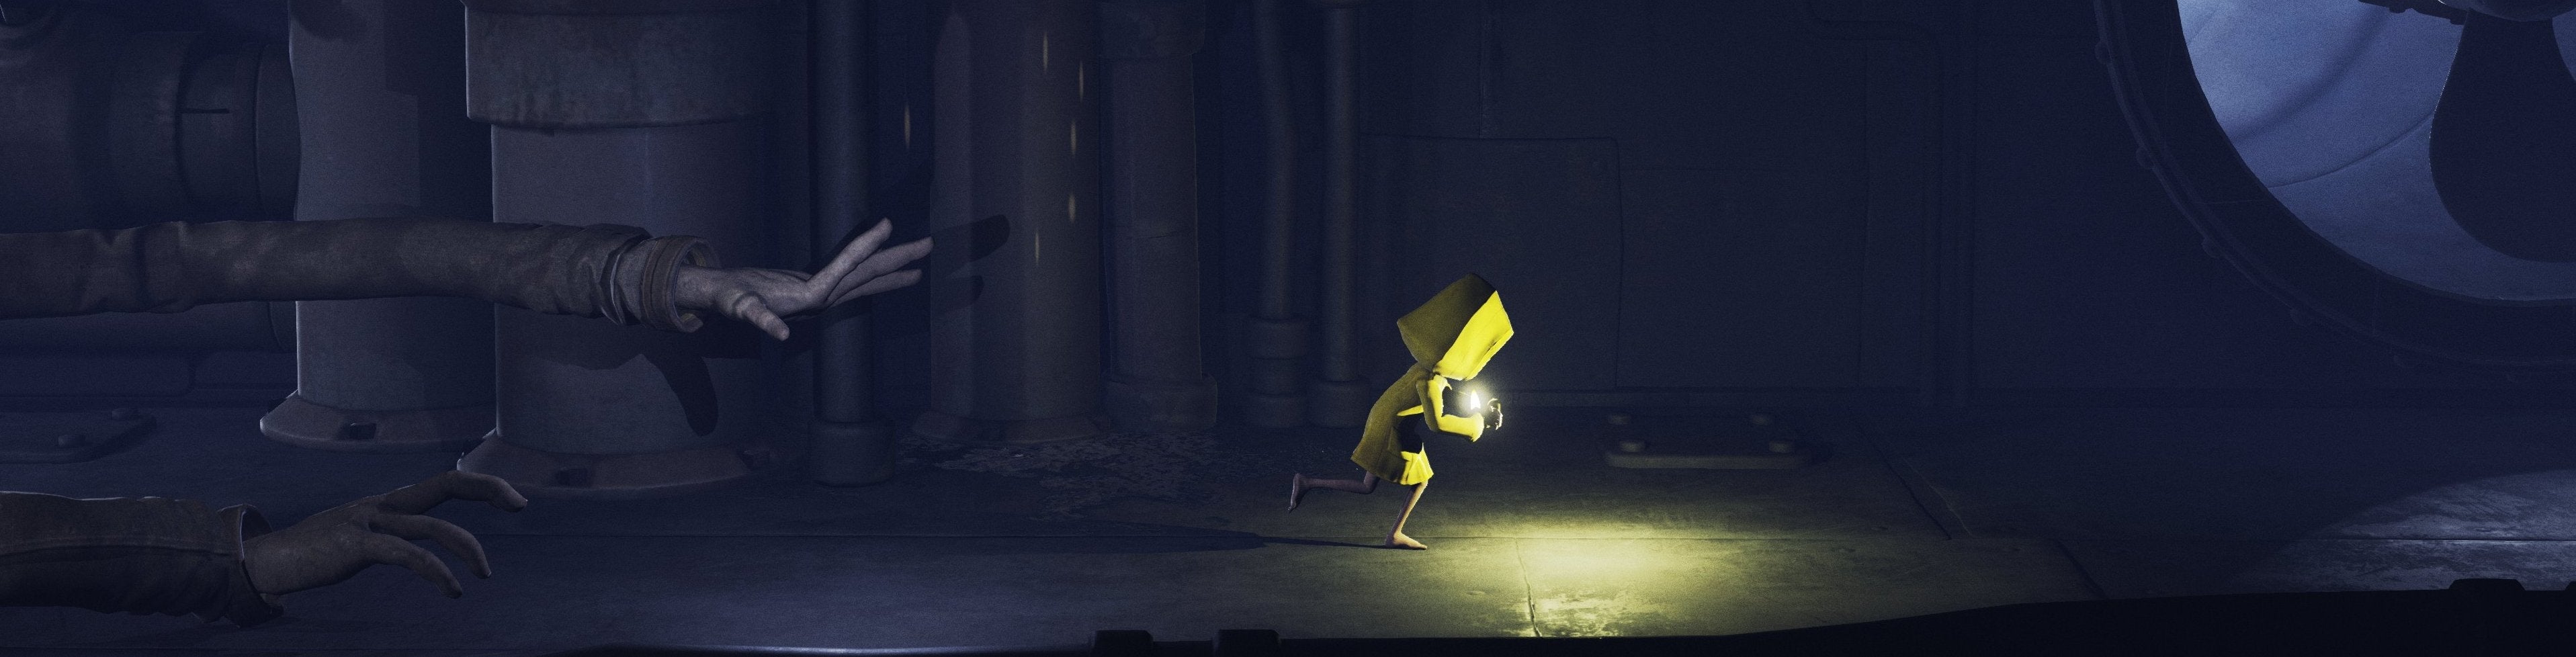 Image for Watch: Little Nightmares taps into your darkest childhood fears